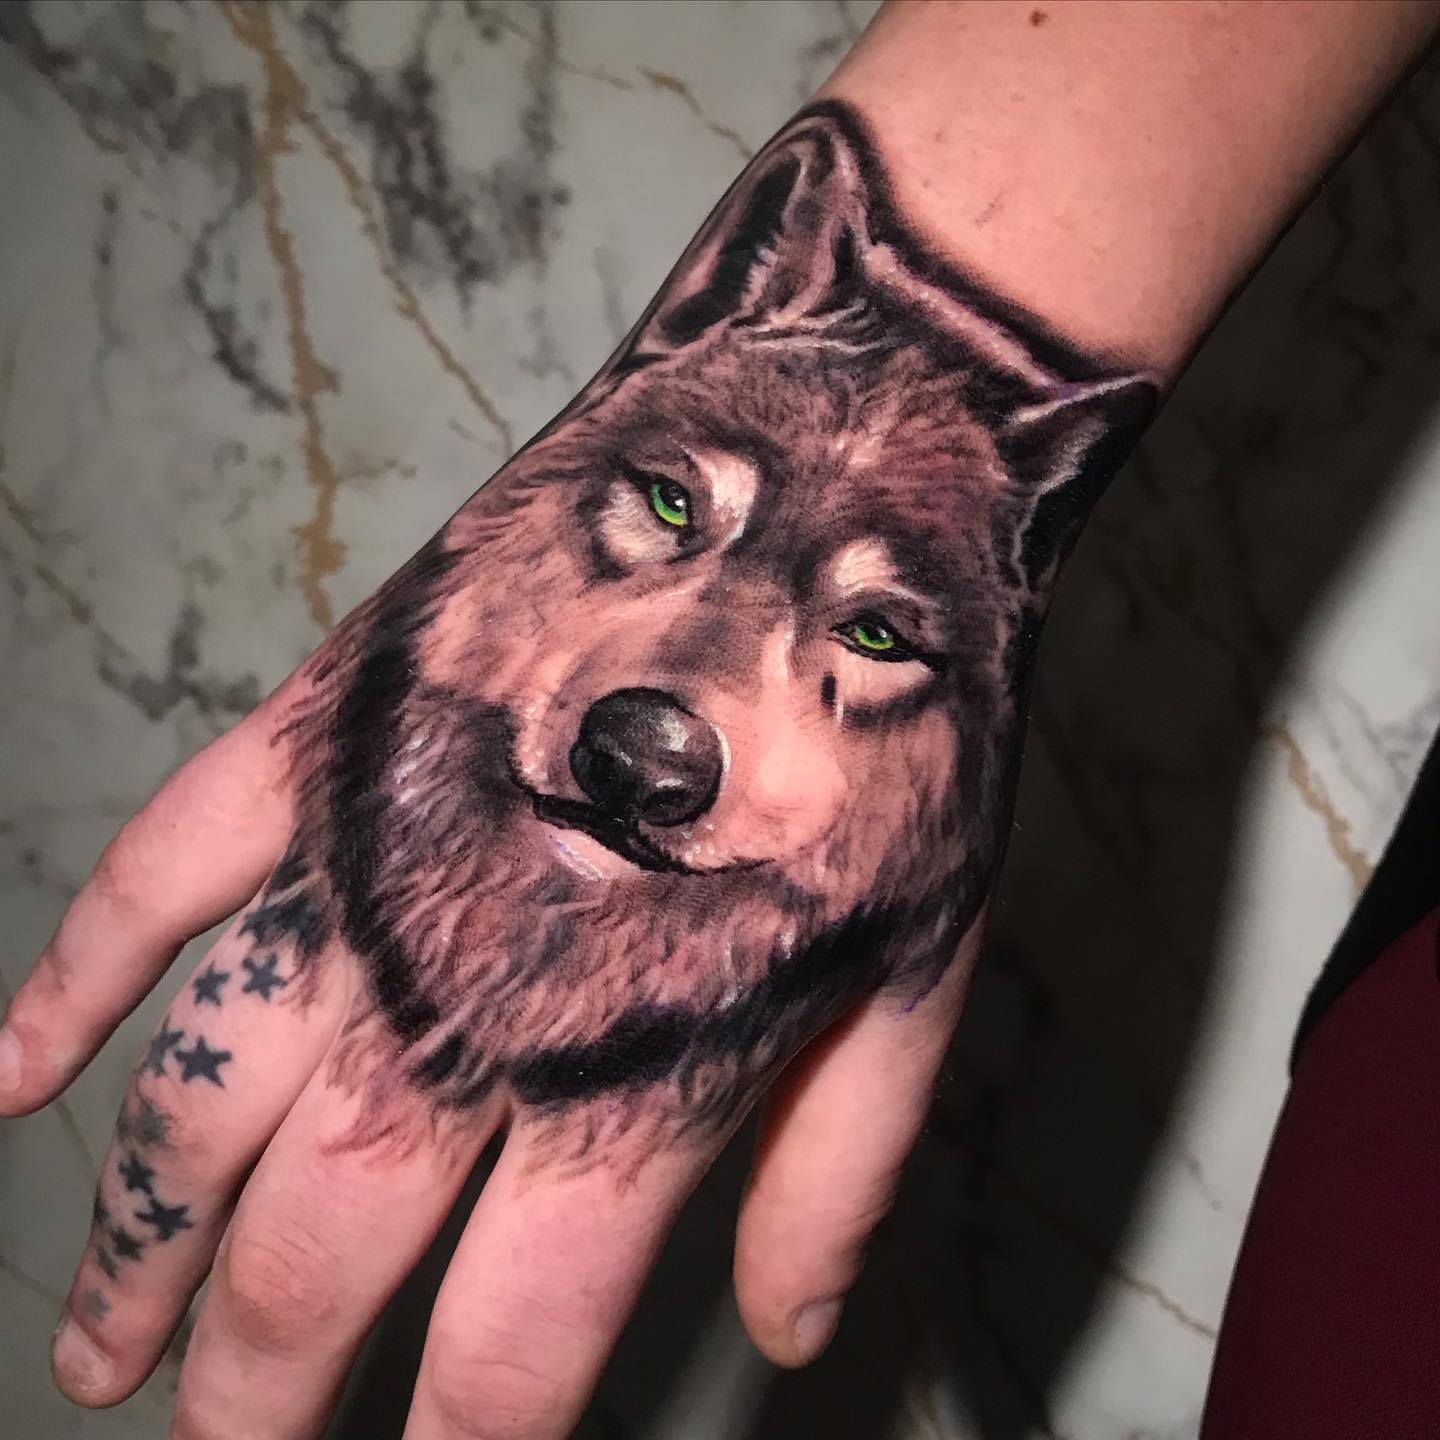 For the ones who are fond of wolves and tattoos. With this design, you can see your tattoo all the time.